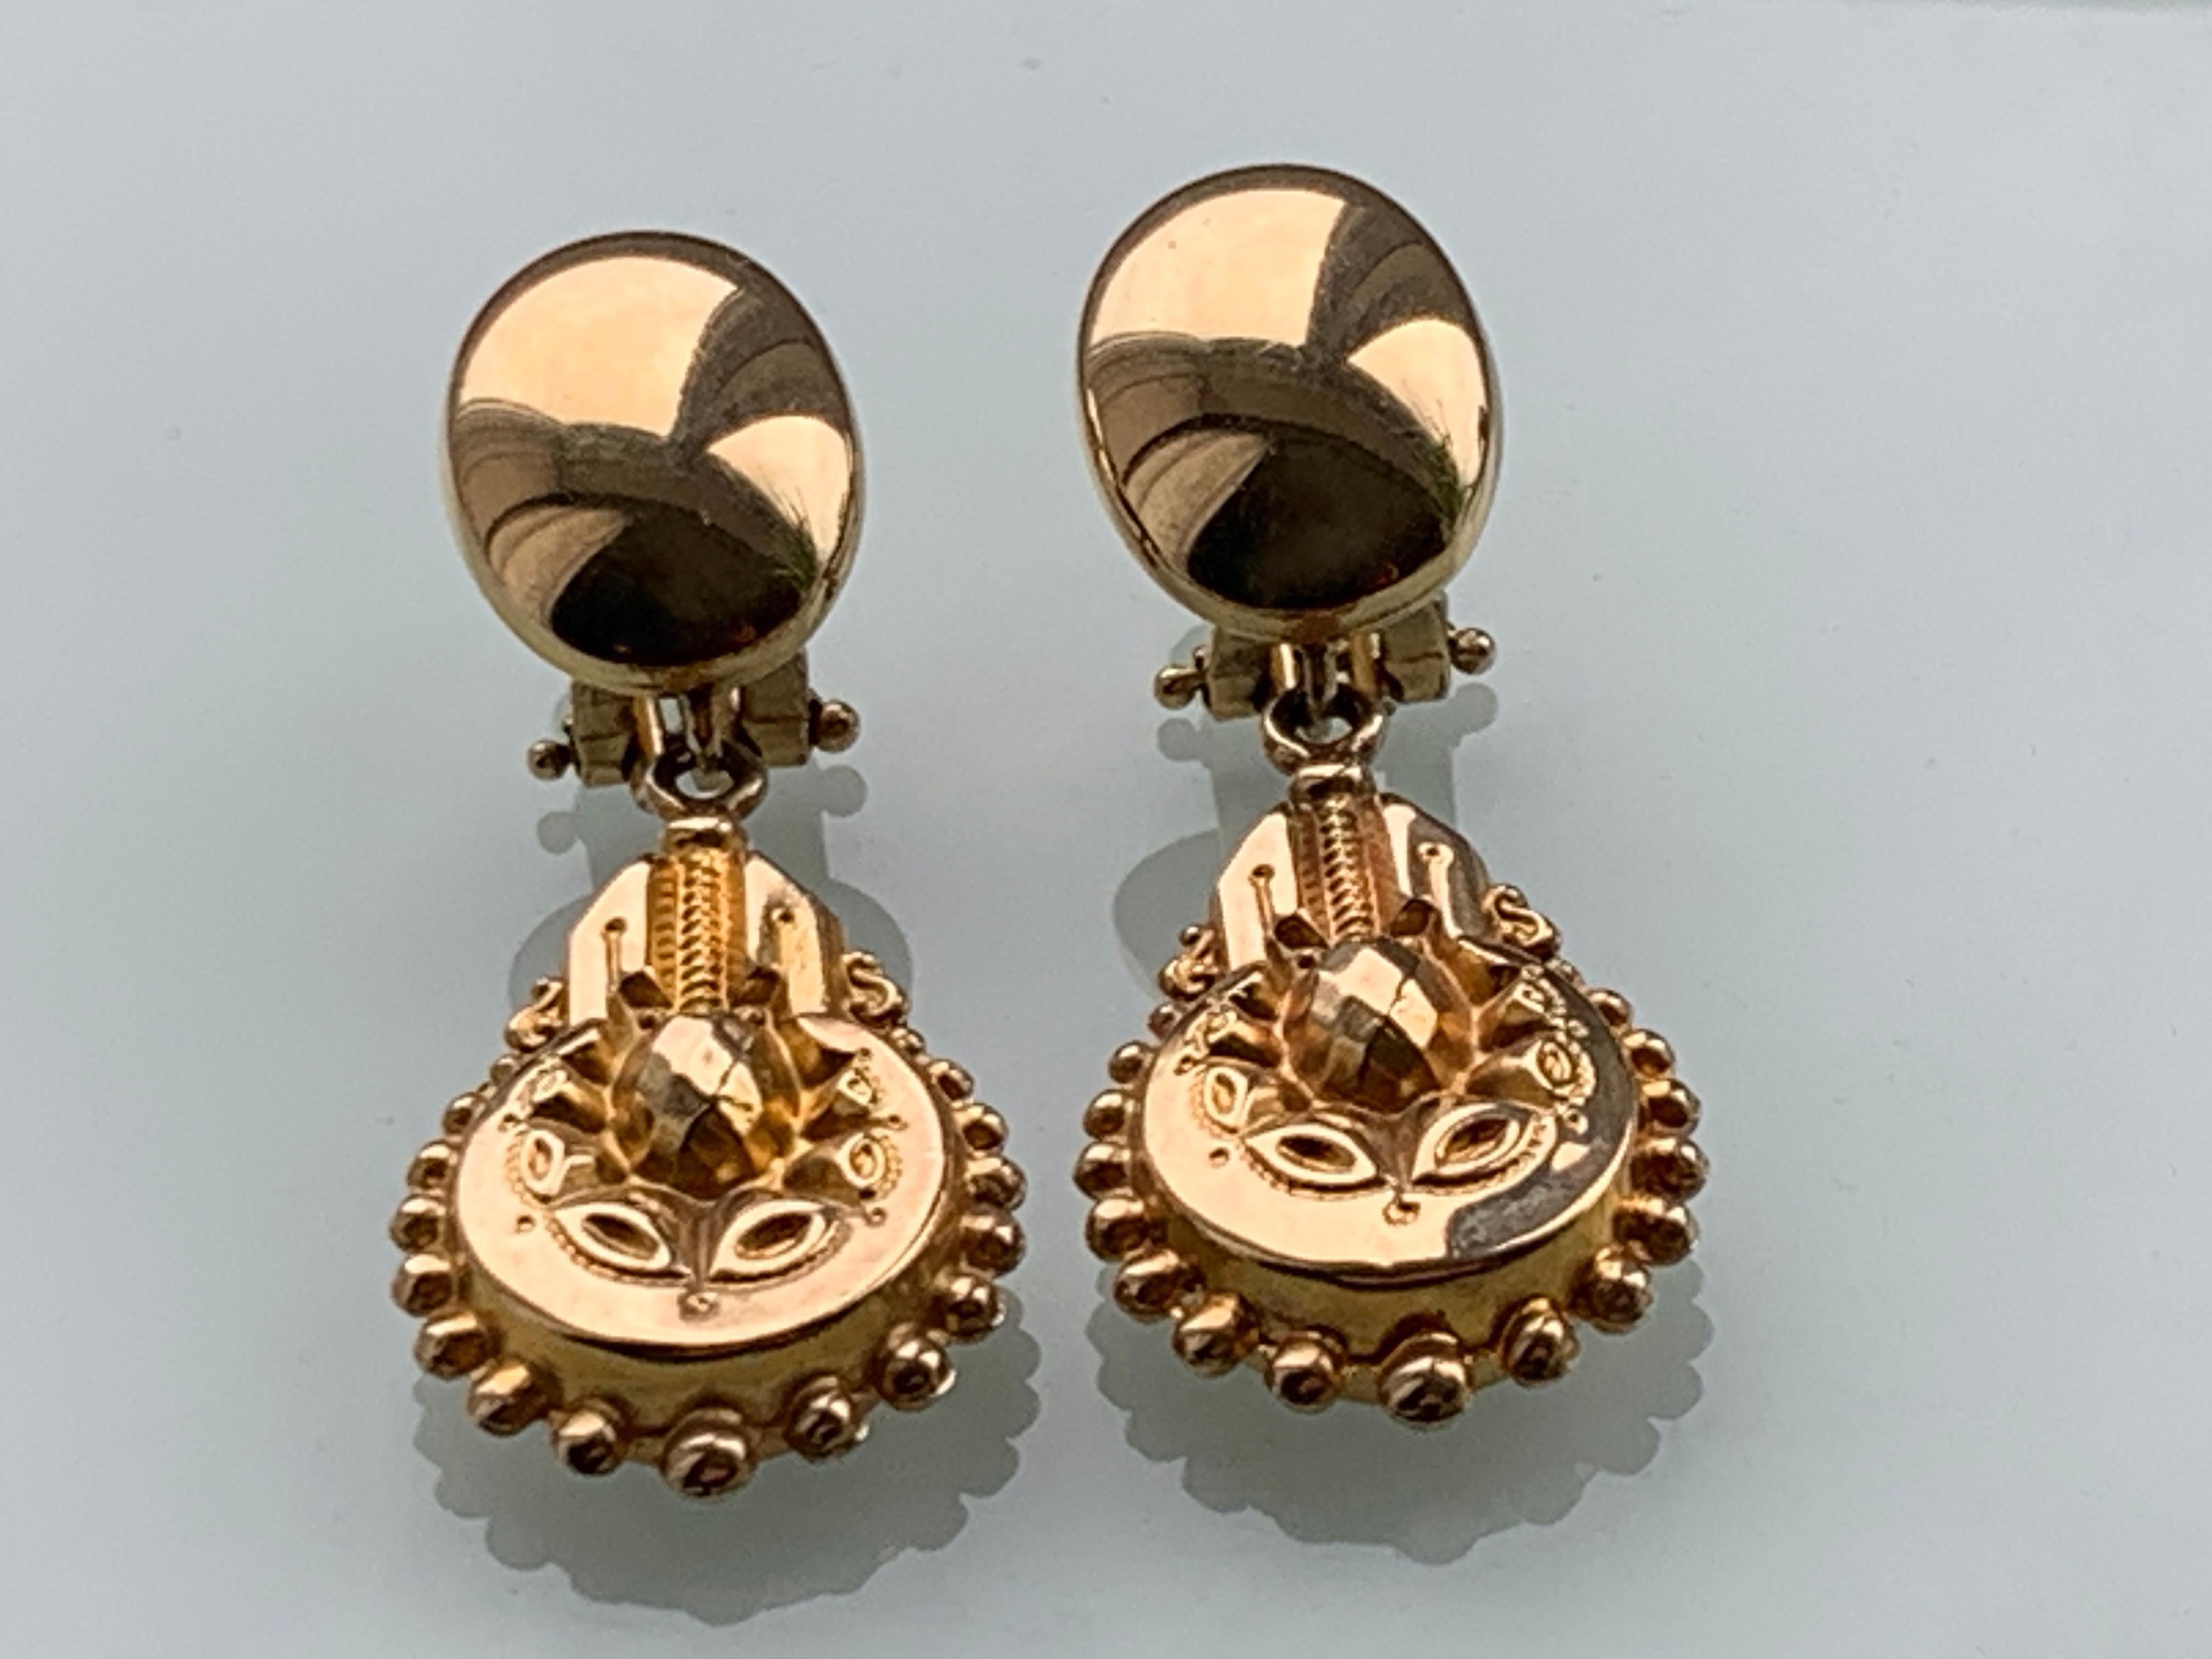 Beautiful 9ct Gold Earrings
with Omega Backs
Victorian Replica design 
Each earring is Hollow
Fully Hallmarked posts
Modern dated 1993